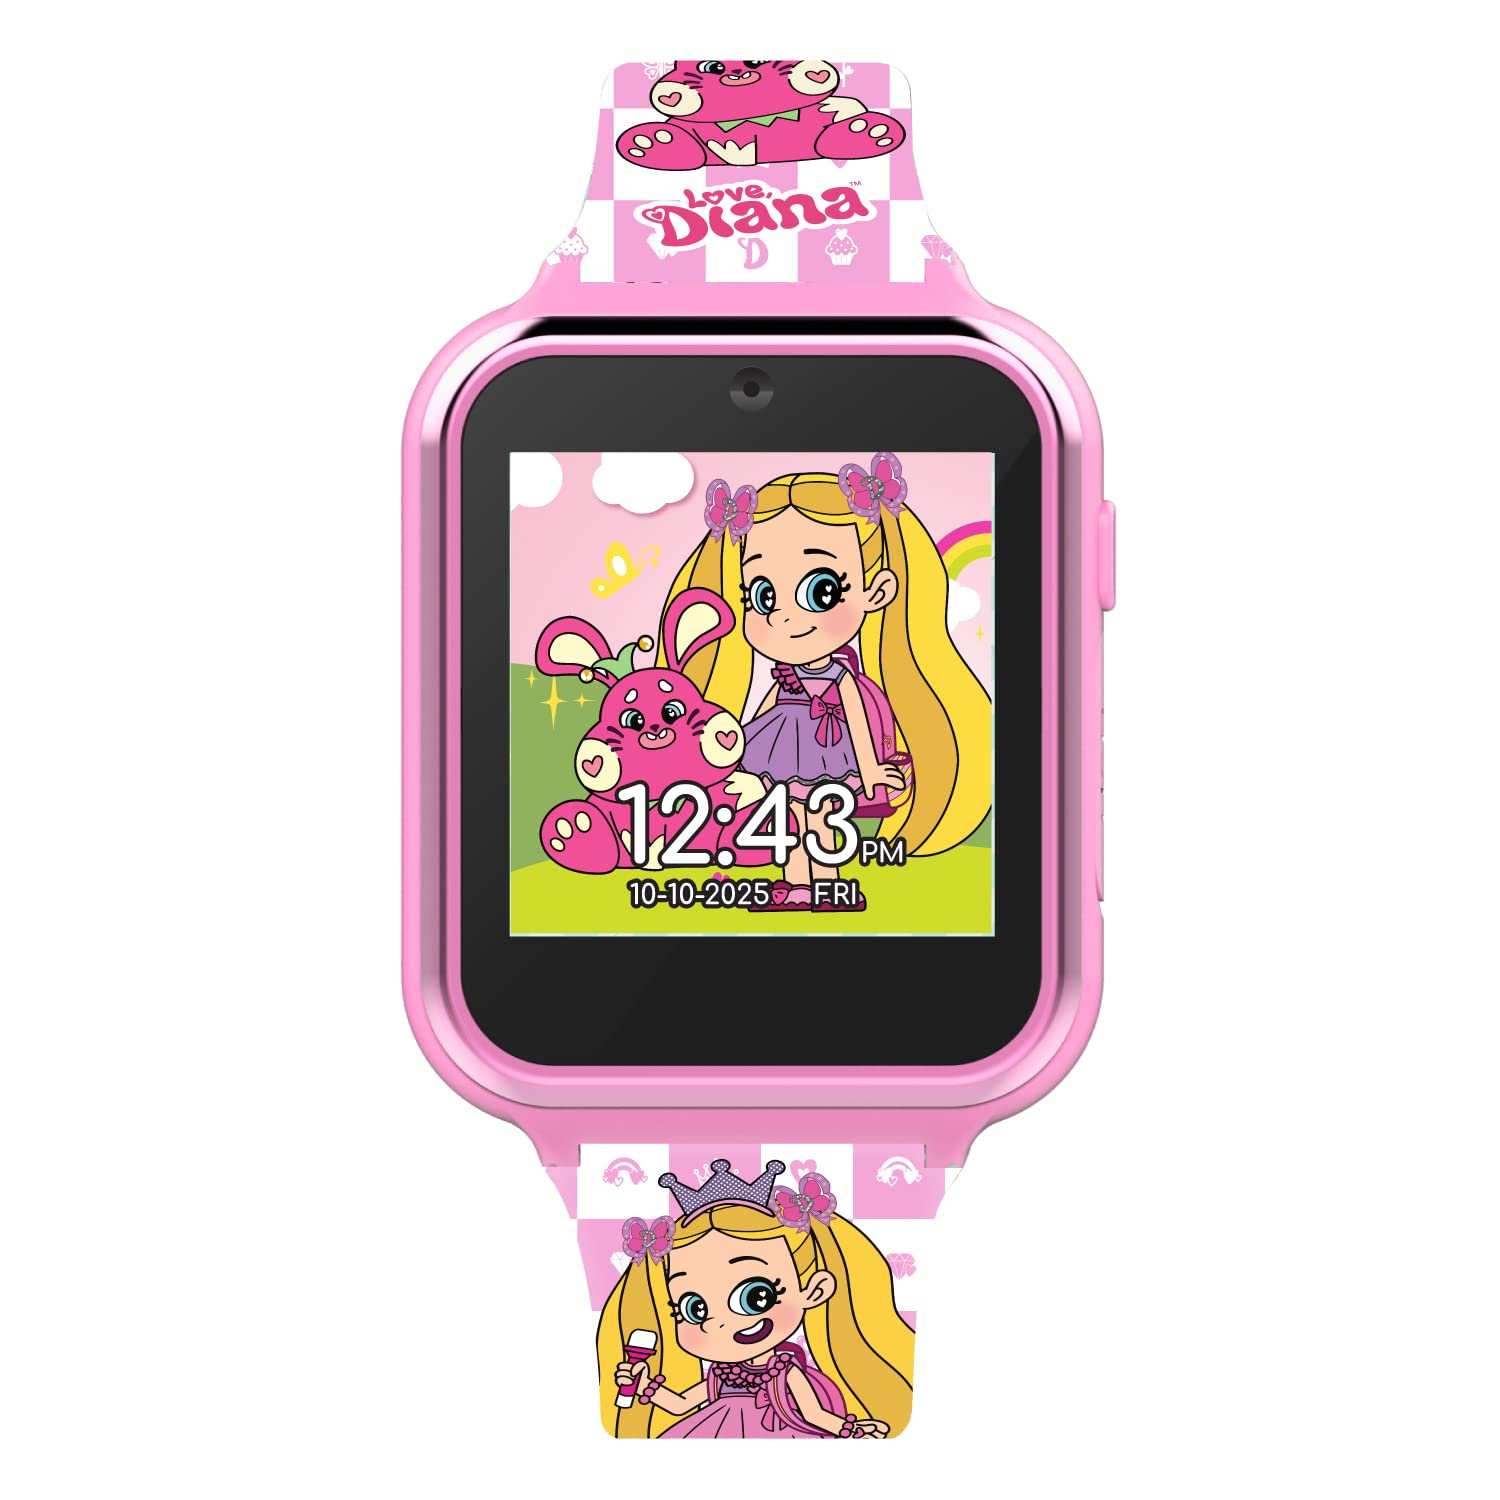 Accutime Kids Love, Diana Show Educational Learning Touchscreen Pink Smart Watch Toy with Graphic Strap for Girls, Boys, Toddlers - Selfie Cam, Games, Alarm, Calculator, Pedometer (Model: LDA4037AZ)